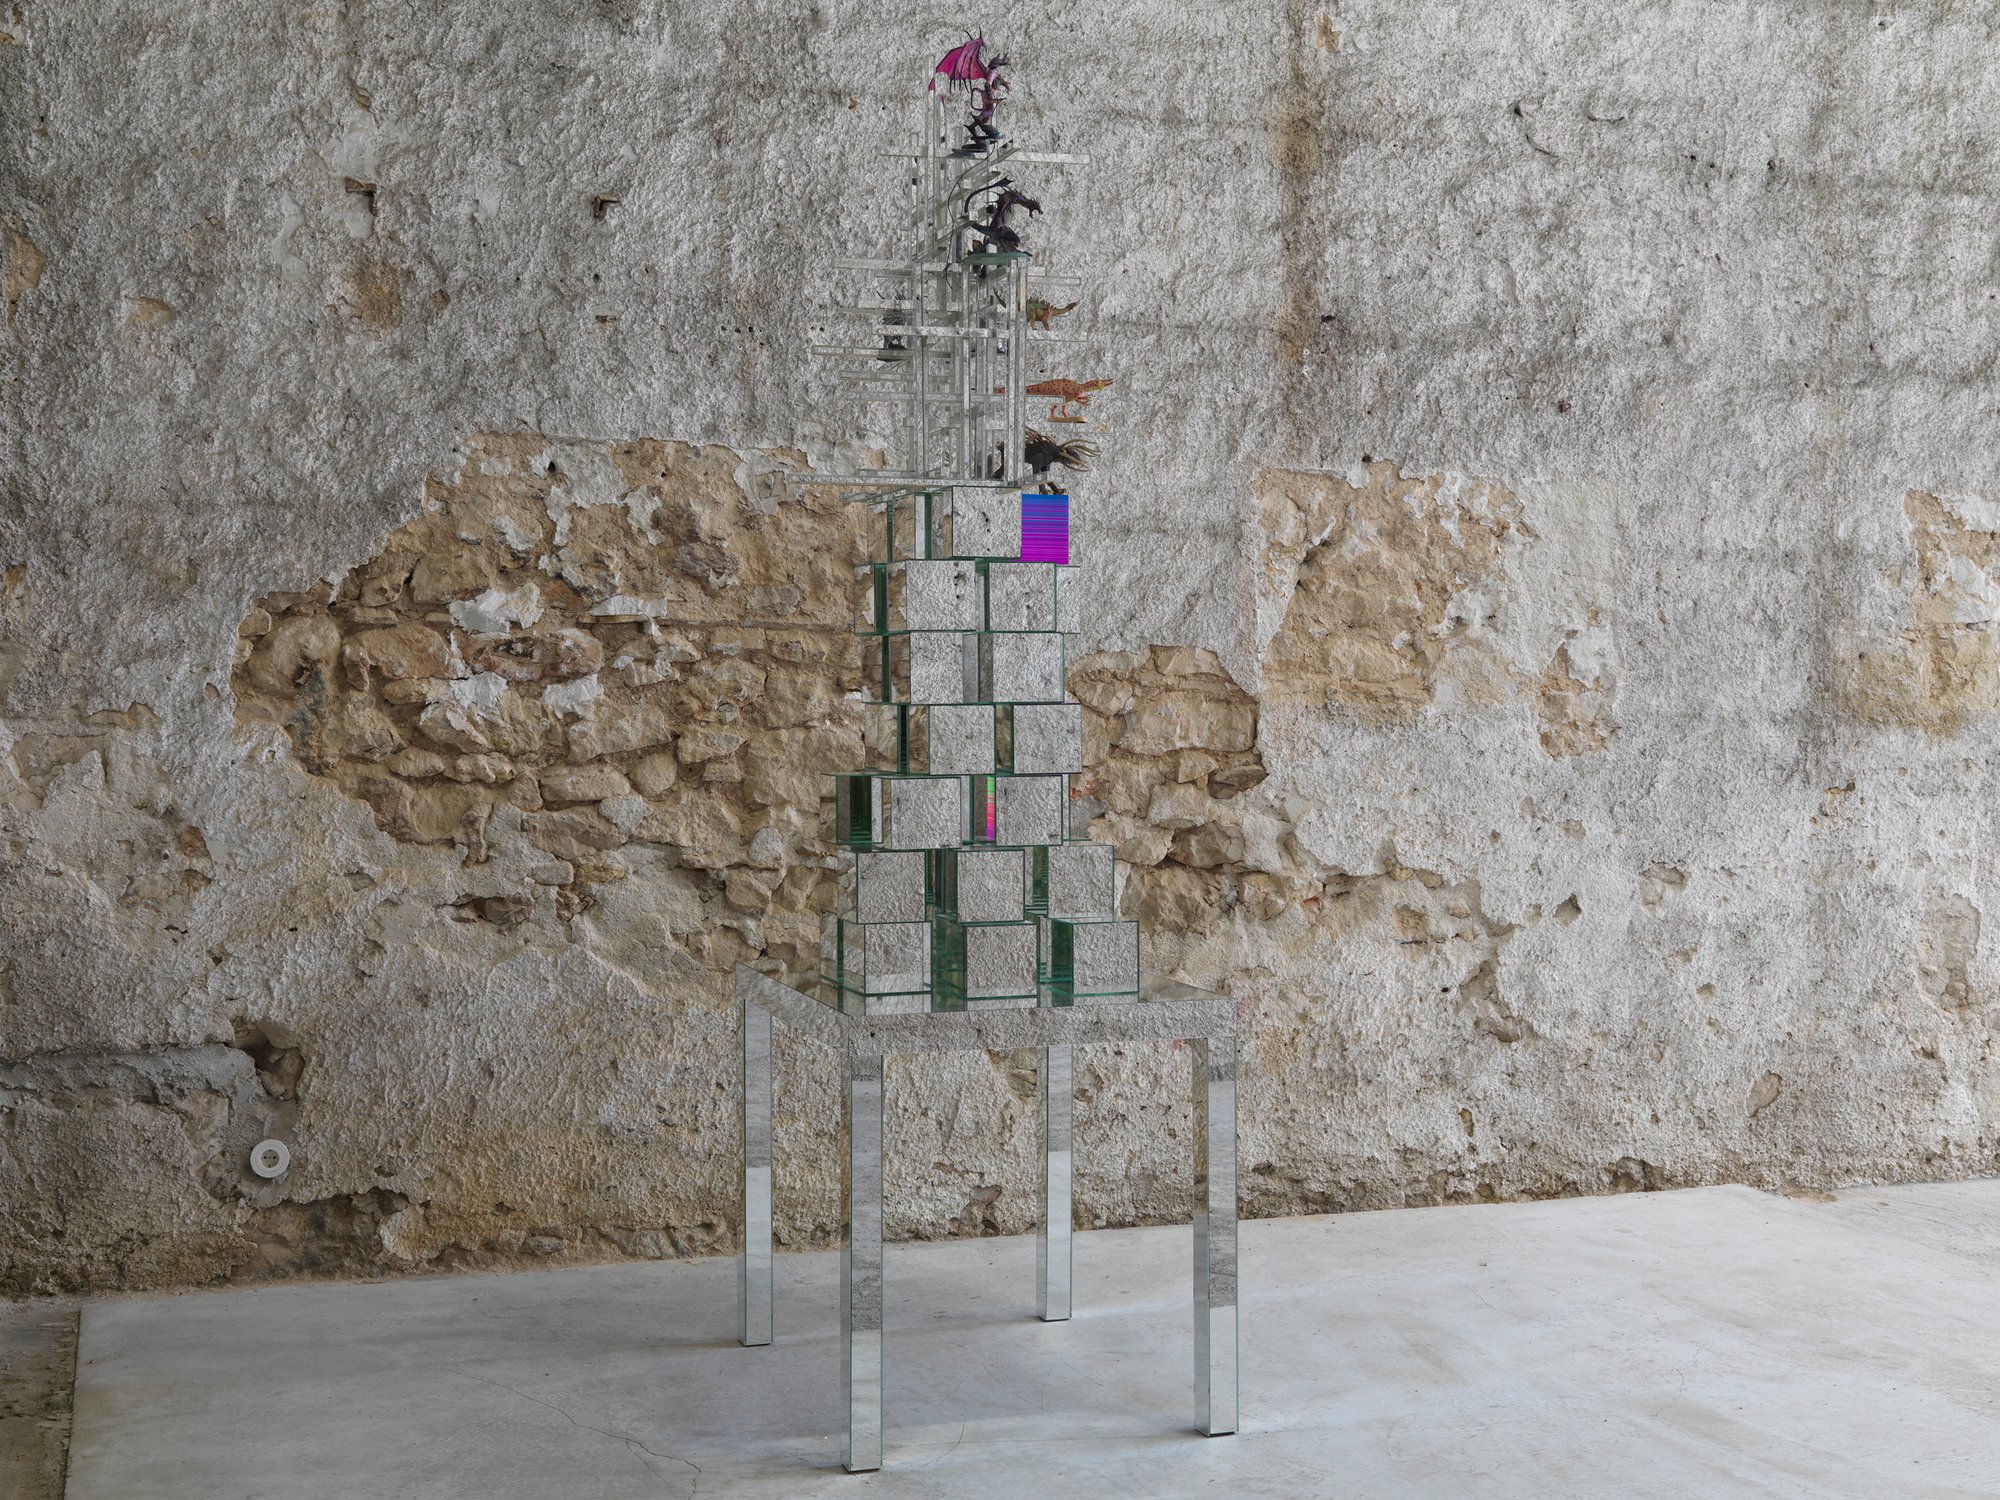 Thanasis Totsikas, Glass Tower, mirrors, air brush car paint on aluminum, plastic zombie toys, steel and mirror table, dimensions variable, 2008